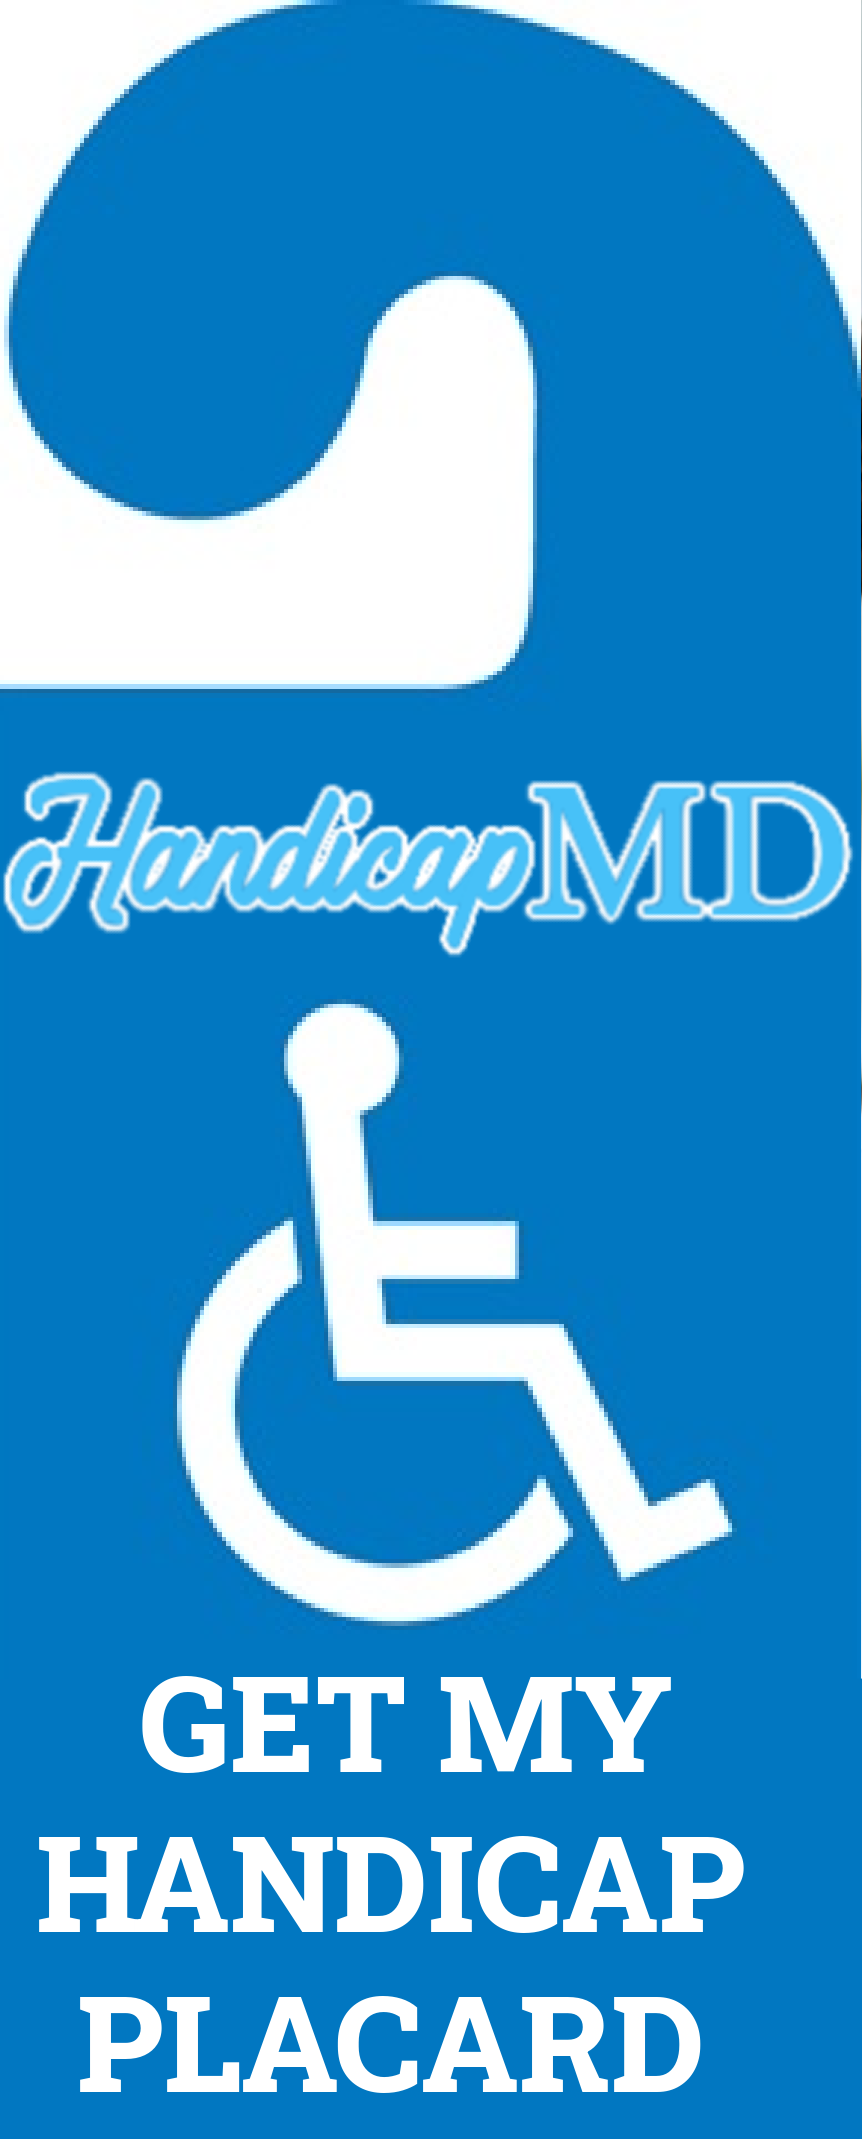 How To Get A Handicap Parking Placard Renewal in Mississippi